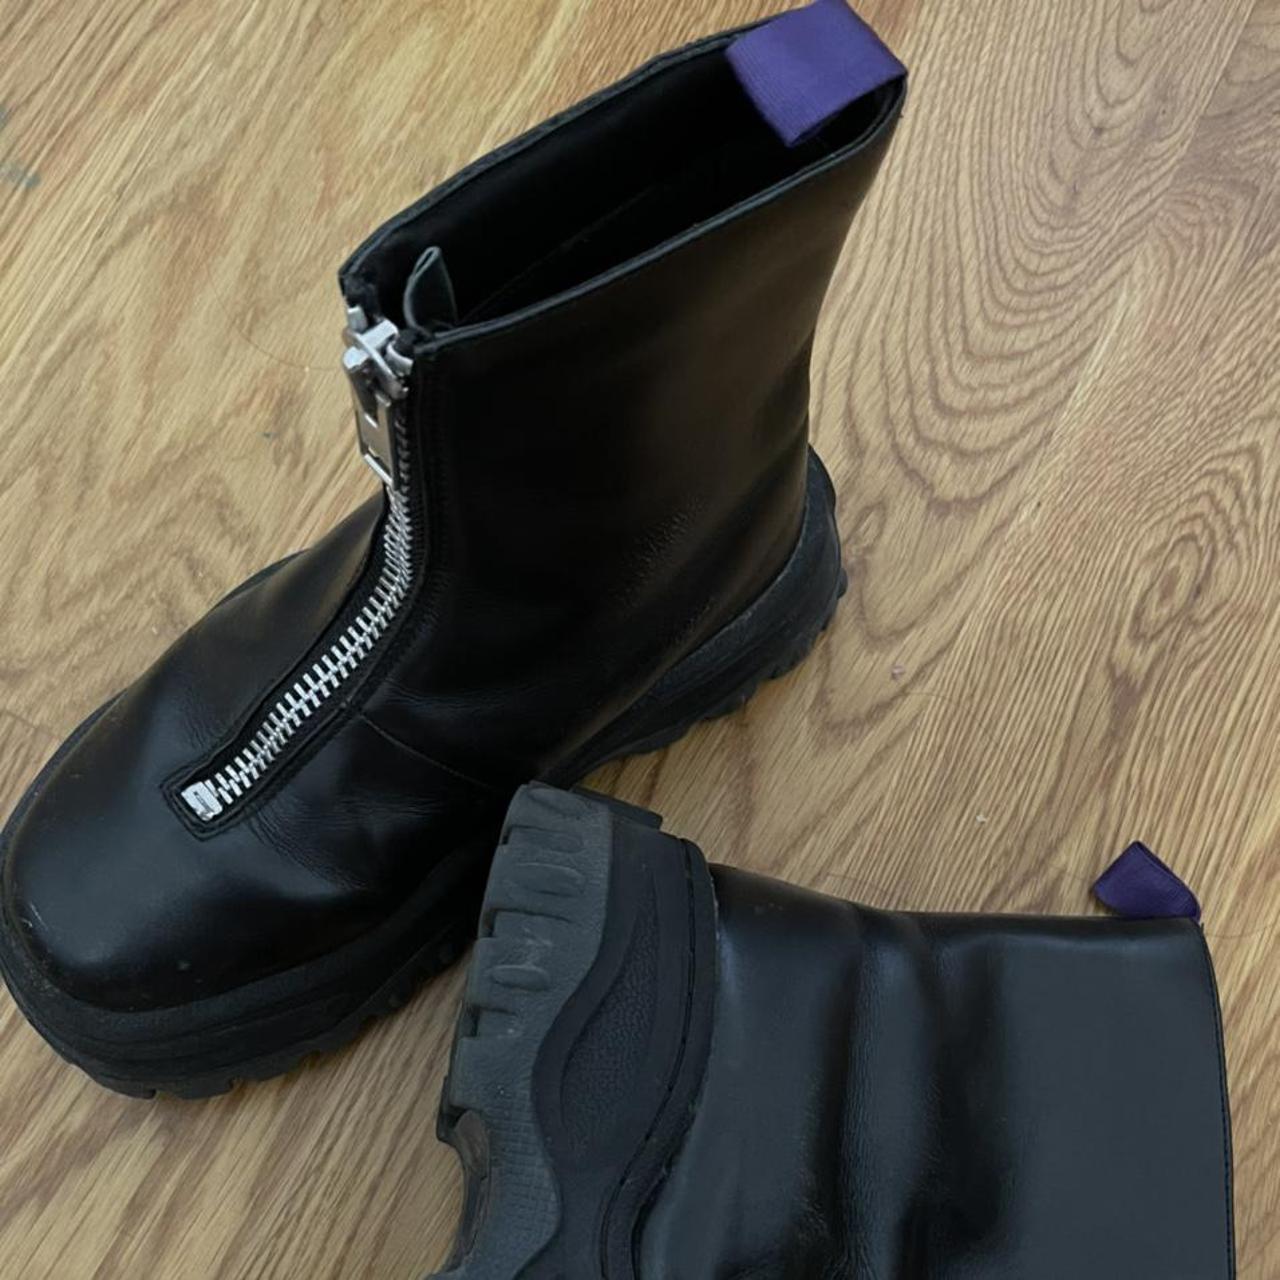 Eytys Raven Boots, black, size 36 in good condition, - Depop